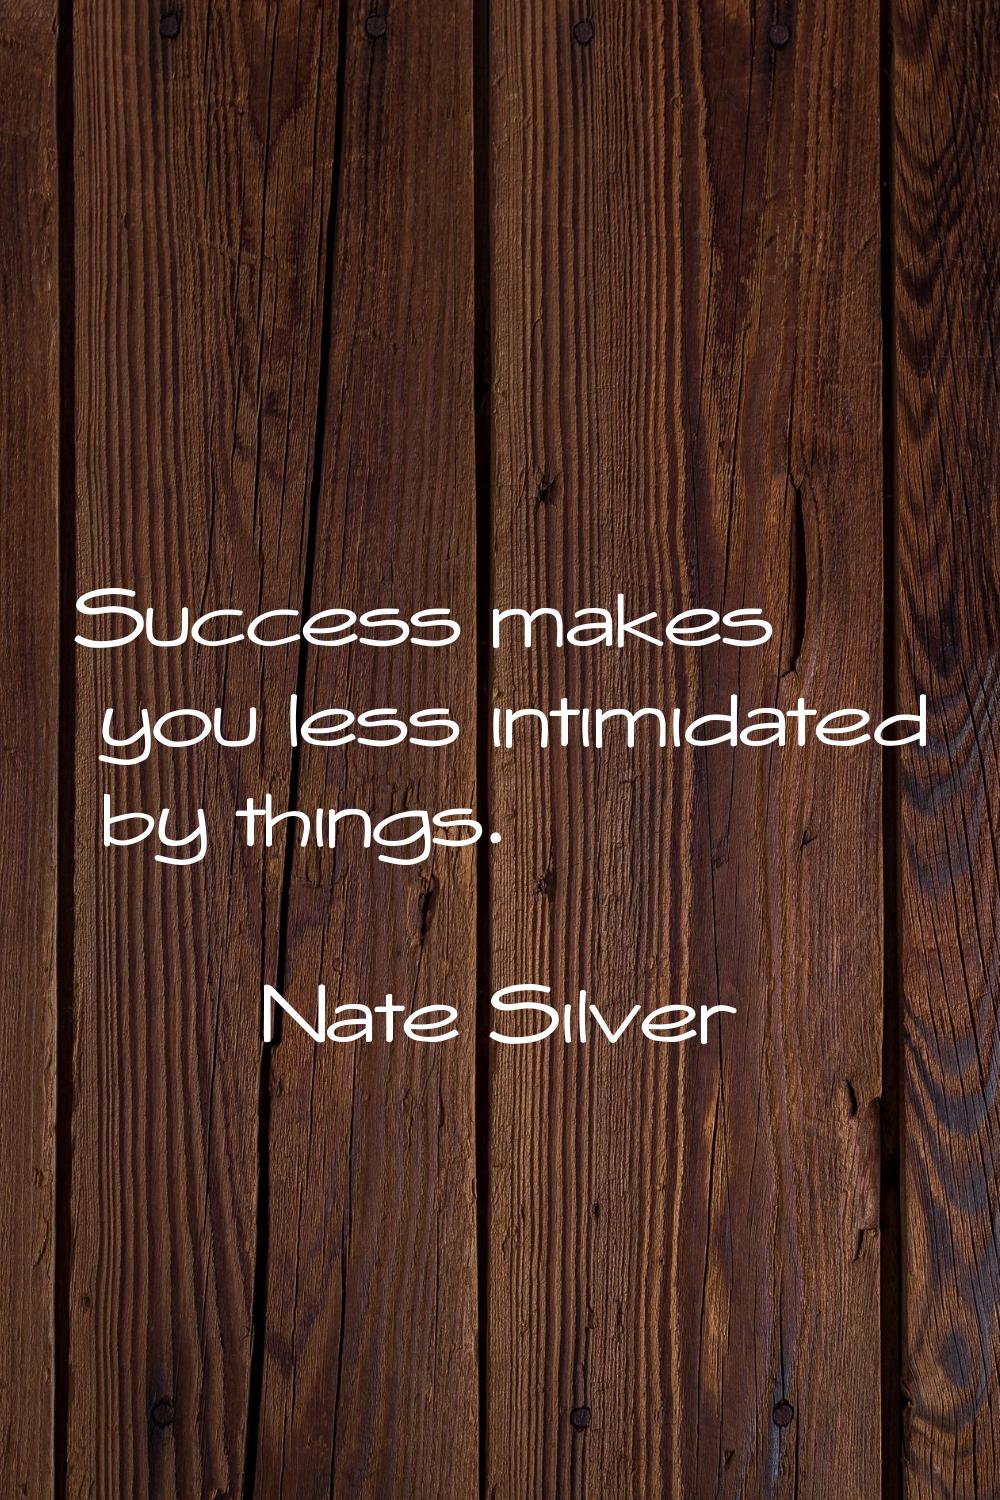 Success makes you less intimidated by things.